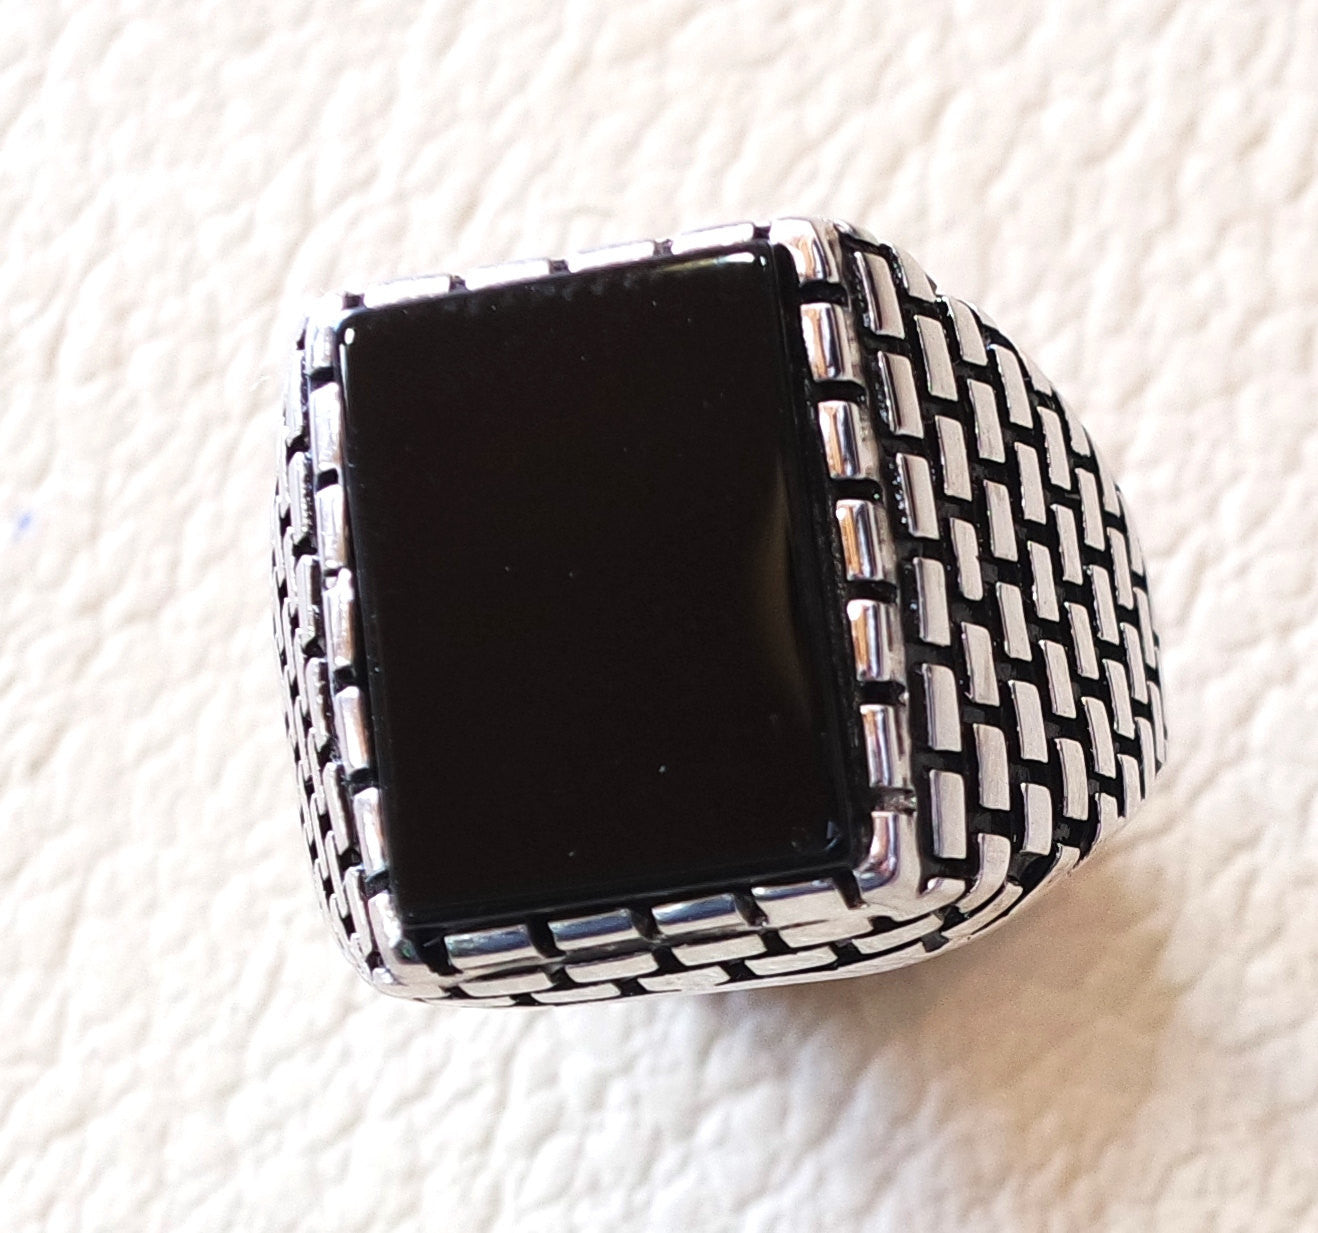 men's ring black natural rectangular flat onyx black agate aqeeq sterling silver 925 all size brick  building style fast shipping